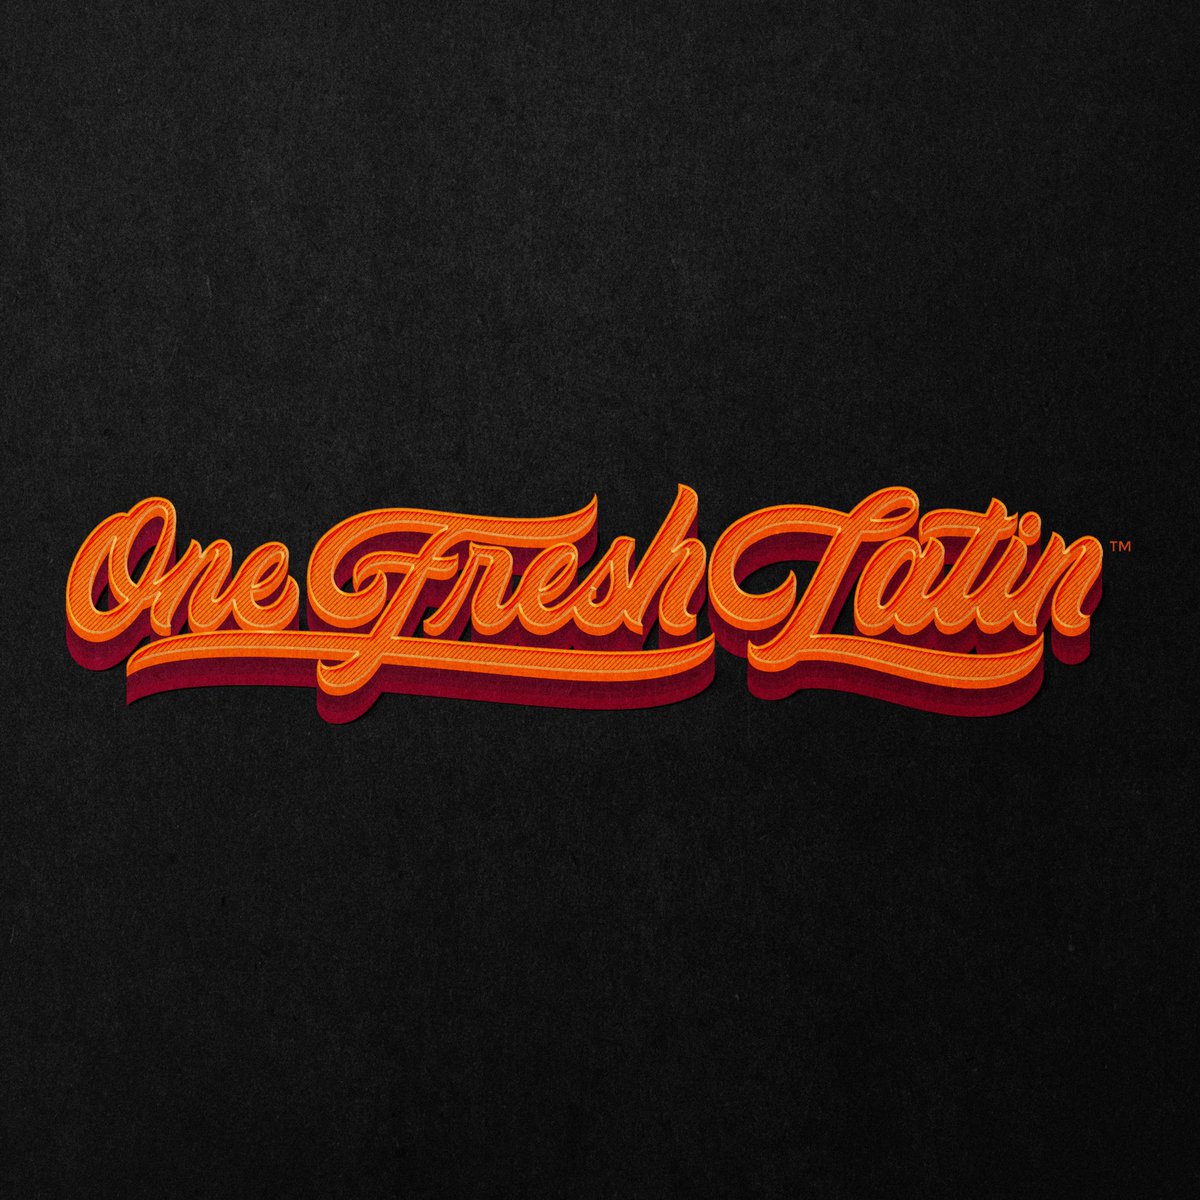 One Fresh Latin re-work logotype. 
.
.
.
.
.
.
.

#Handlettering #Lettering #Type #Logotype #Monogram #letters #logo #onefreshlatin #ofl #beverages #3D #3dtypography